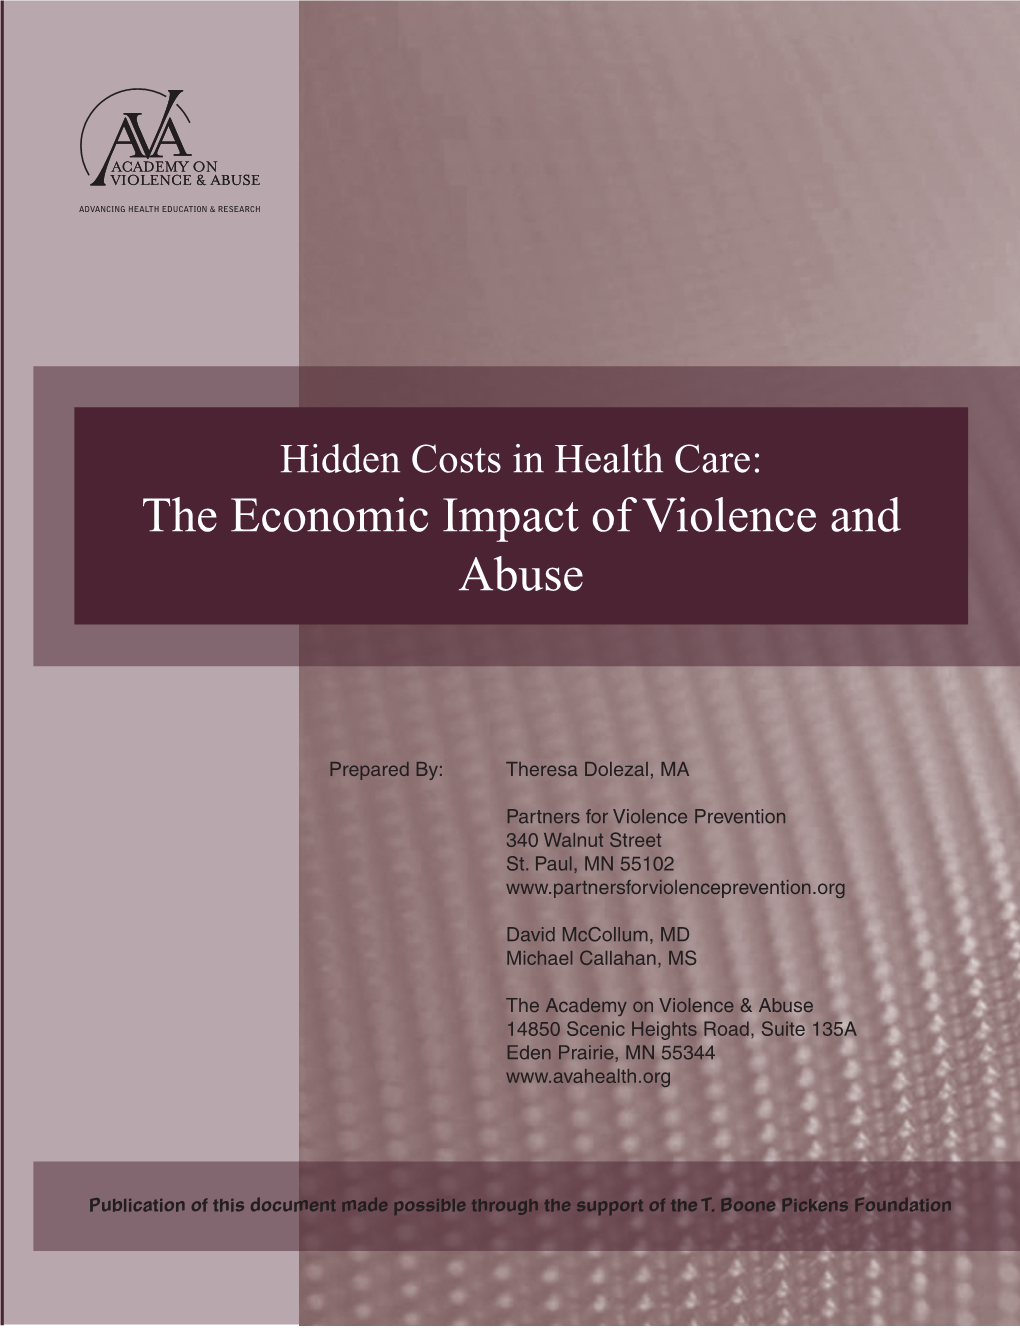 The Economic Impact of Violence and Abuse